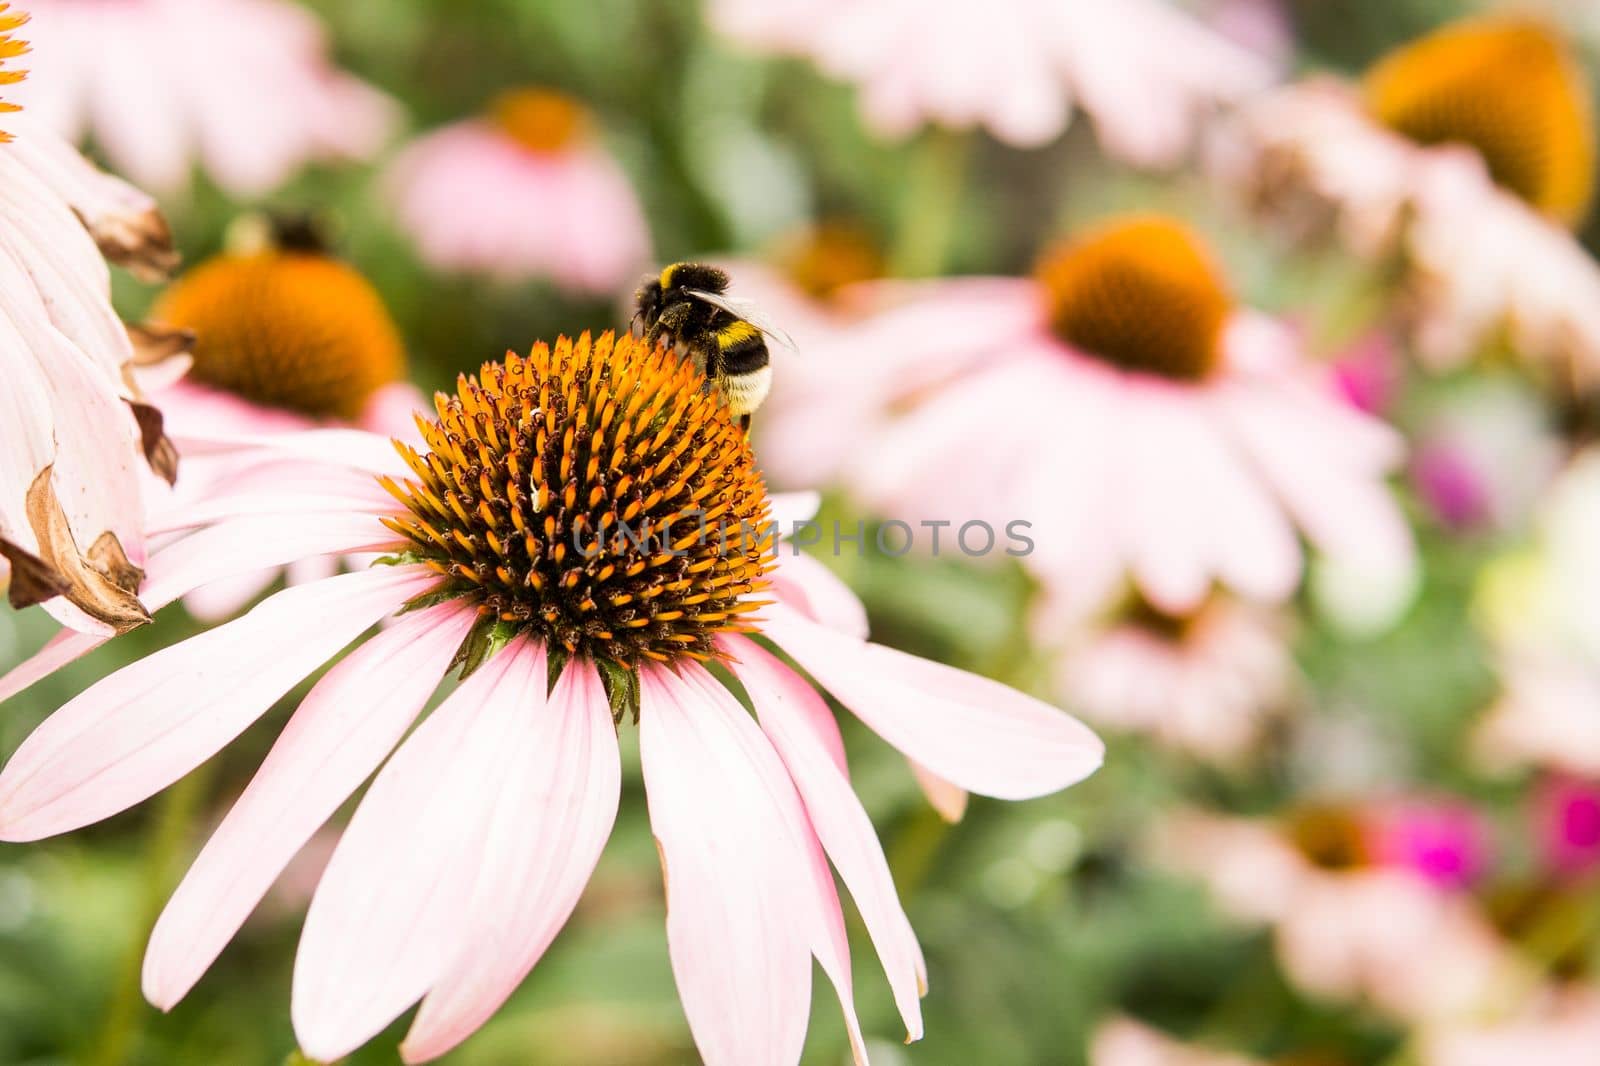 Beautiful daisies growing in the garden. Gardening concept, close-up. The flower is pollinated by a bumblebee. by Annu1tochka